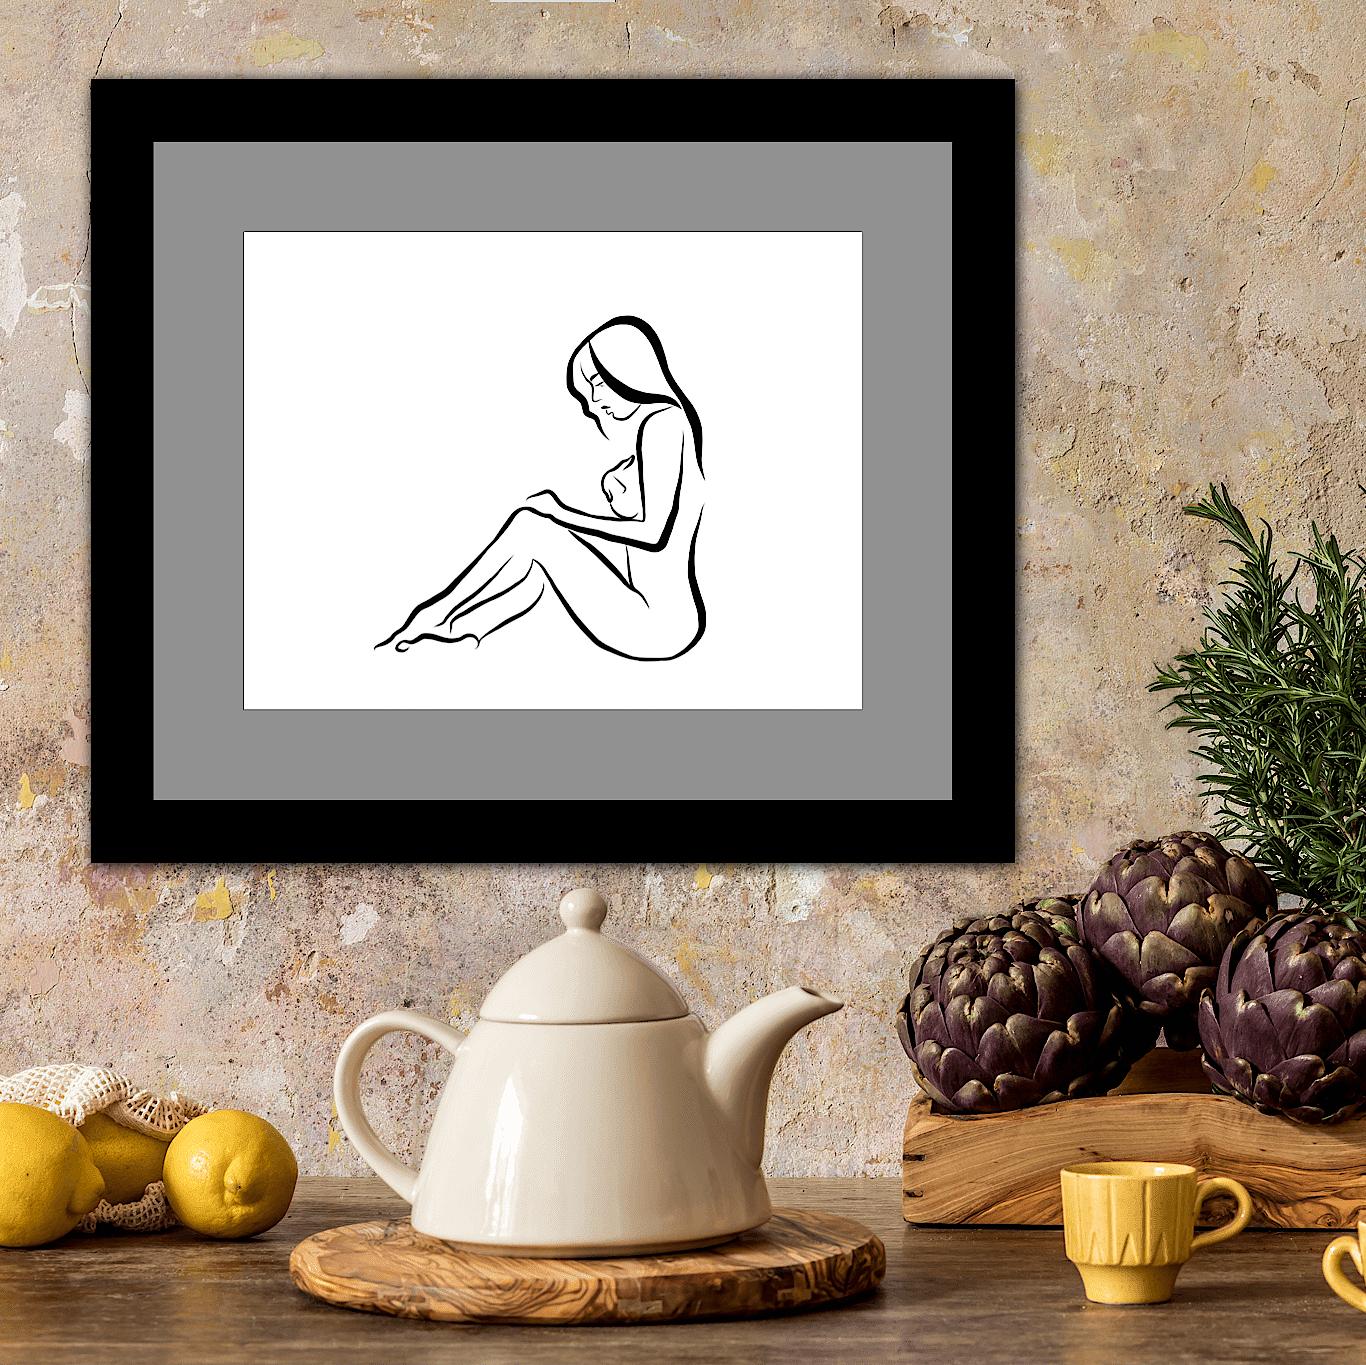 Haiku #21 - 1/50, Digital Vector Drawing Seated Female Nude Woman Figure Cover

This is a limited edition (50) digital black & white print of a seated female nude, executed in 17 vector lines. It is part of a series called Haiku, after the style of